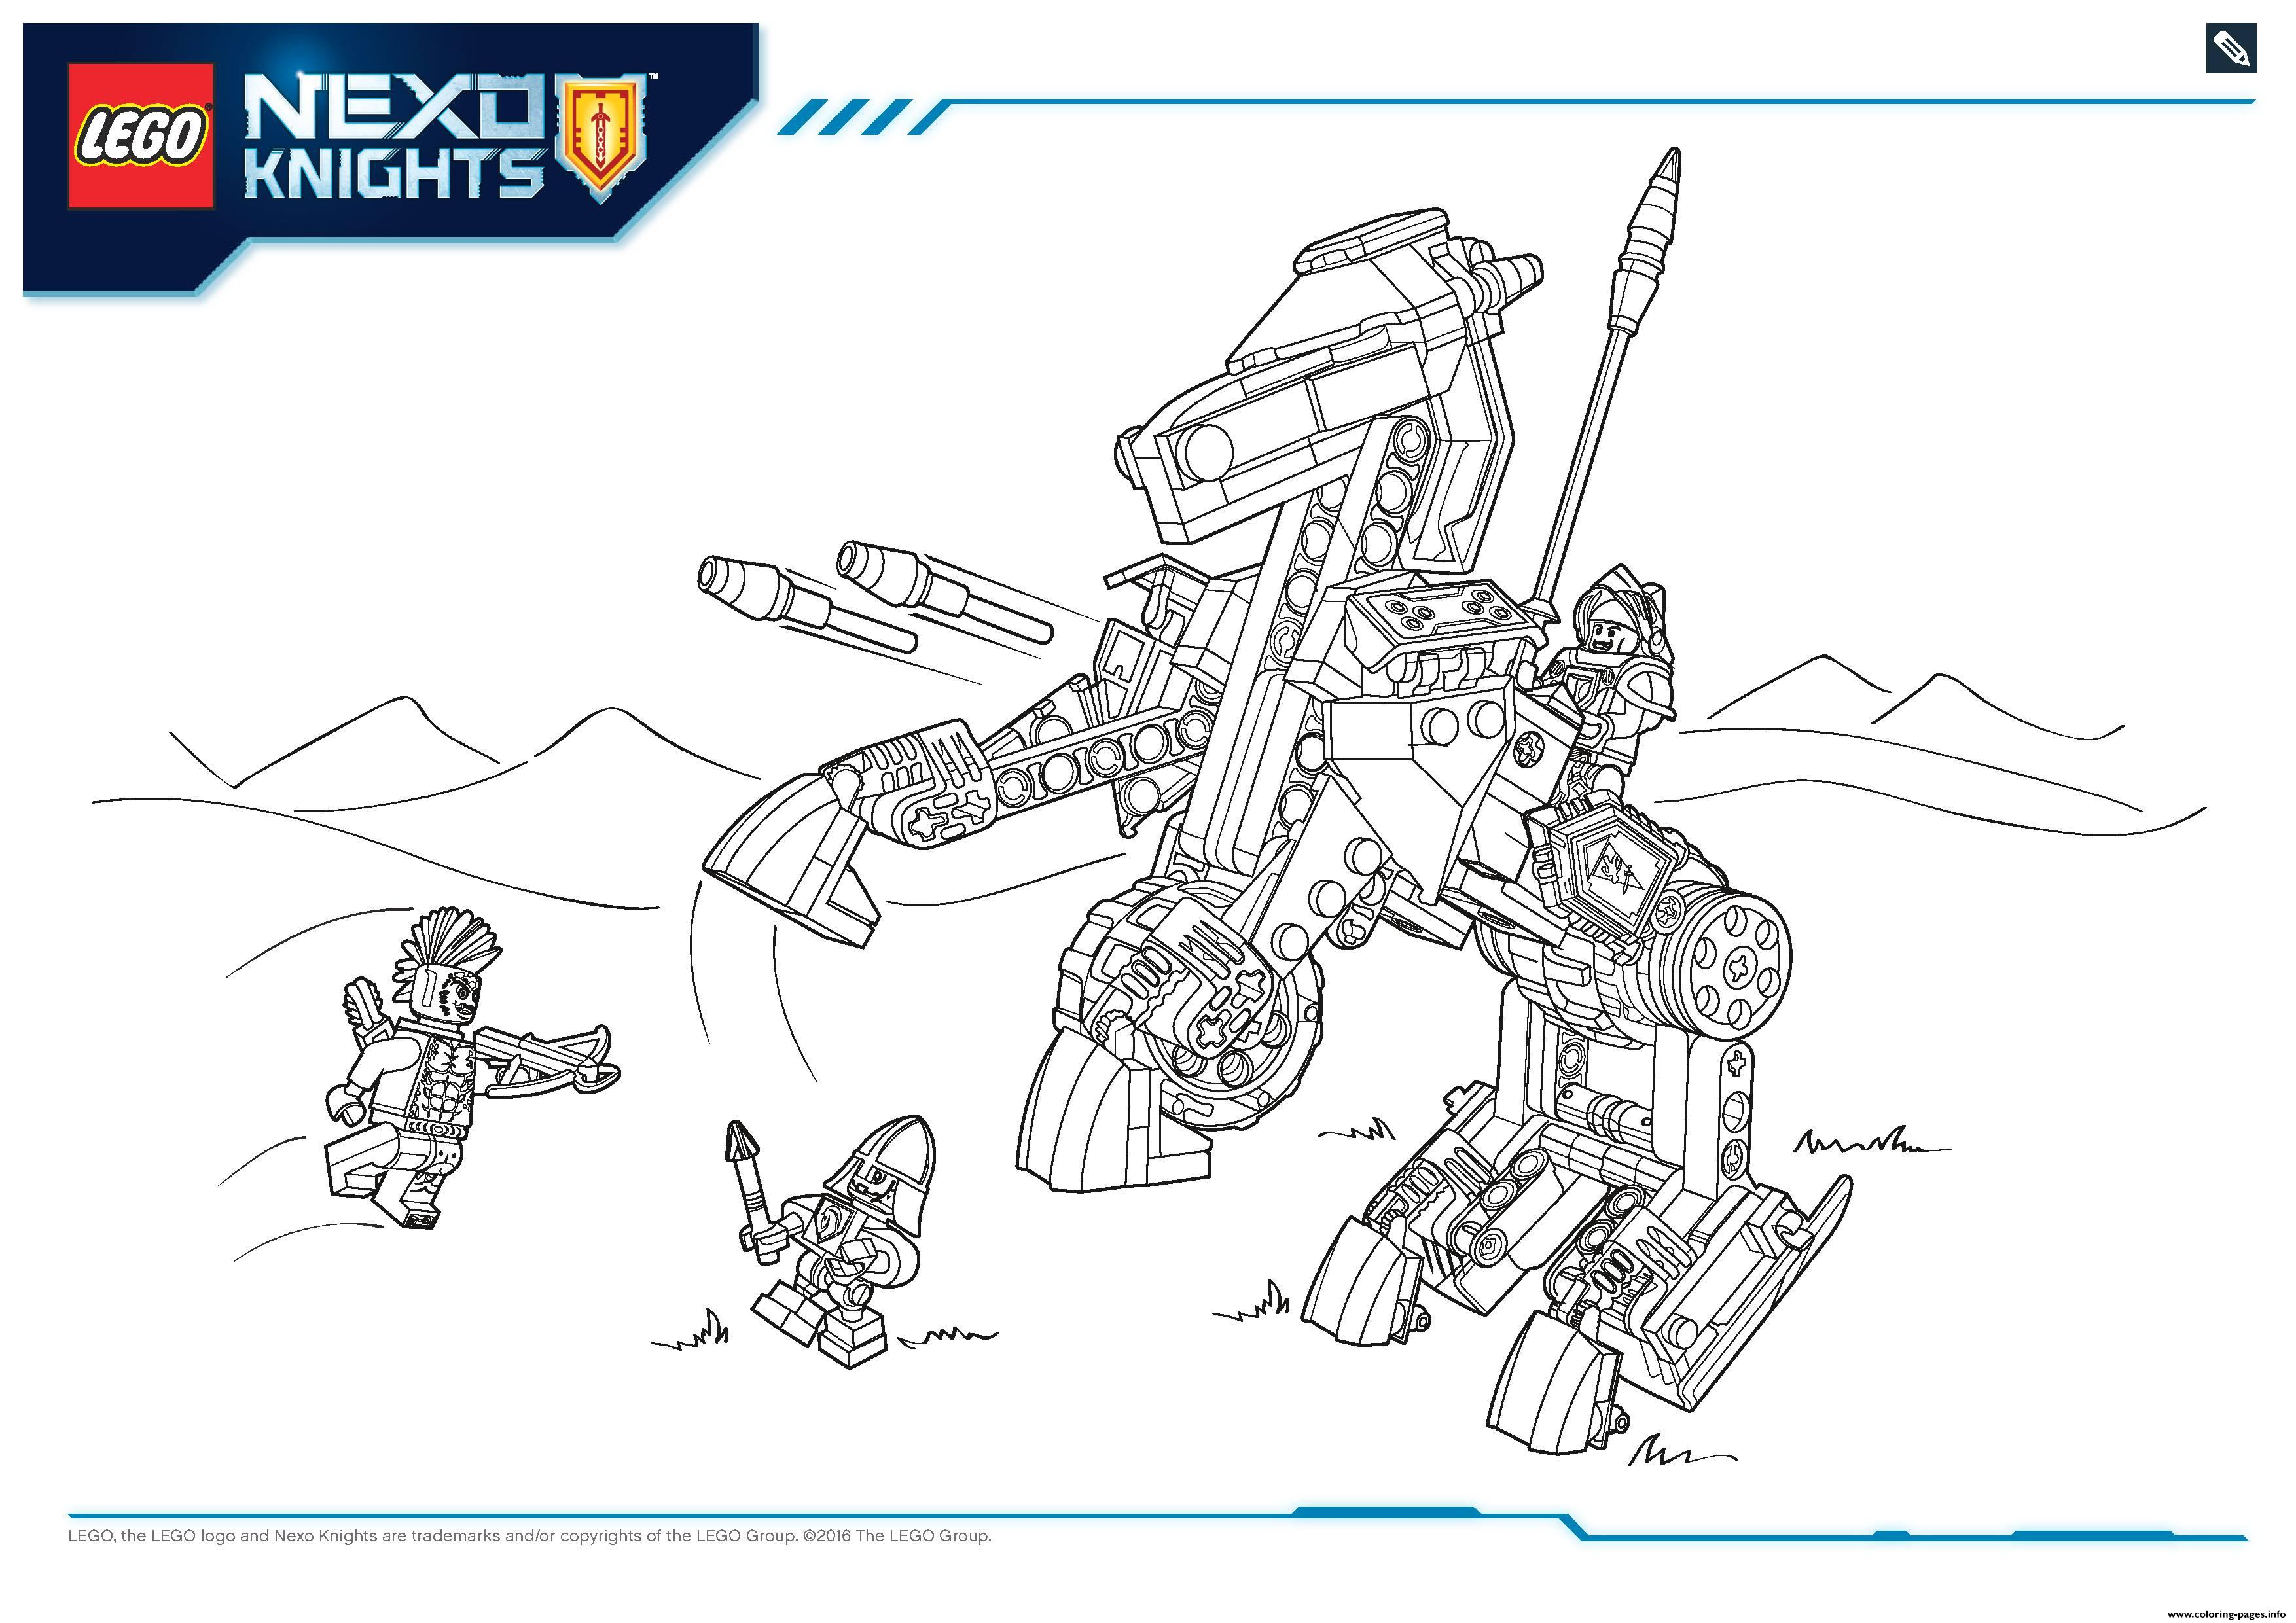 Nexo Knights Coloring Pages Lego Nexo Knights File Page3 Coloring Pages Printable